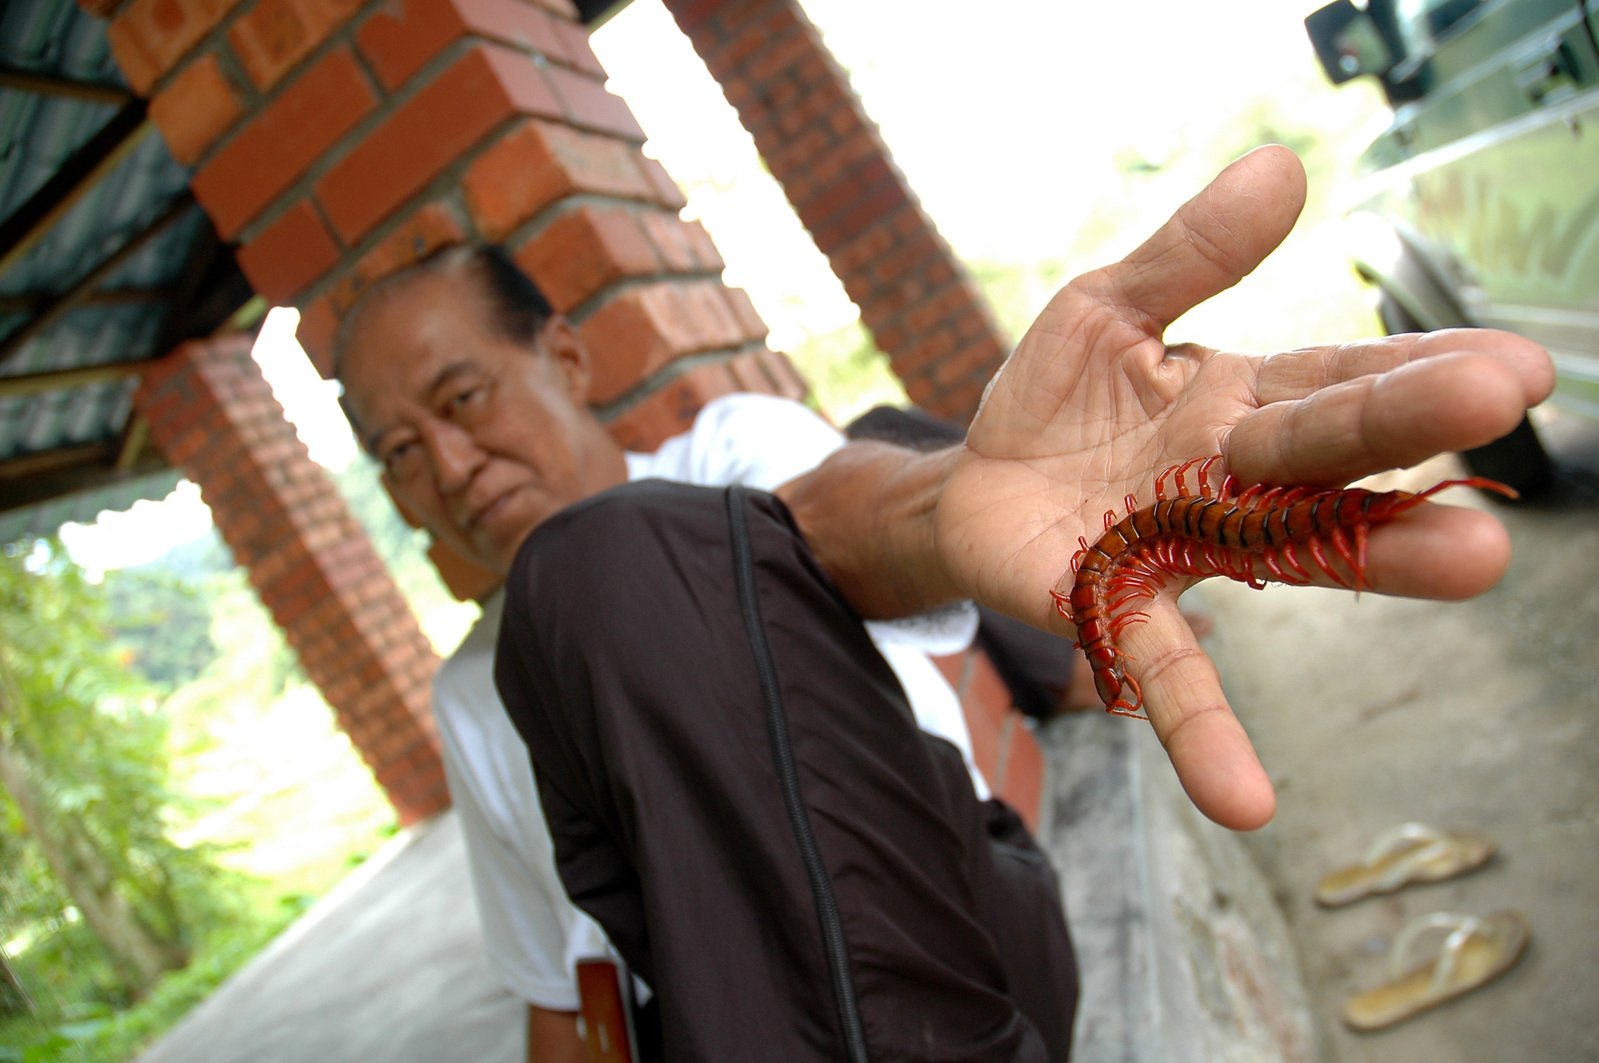 a man holding up a small red insect